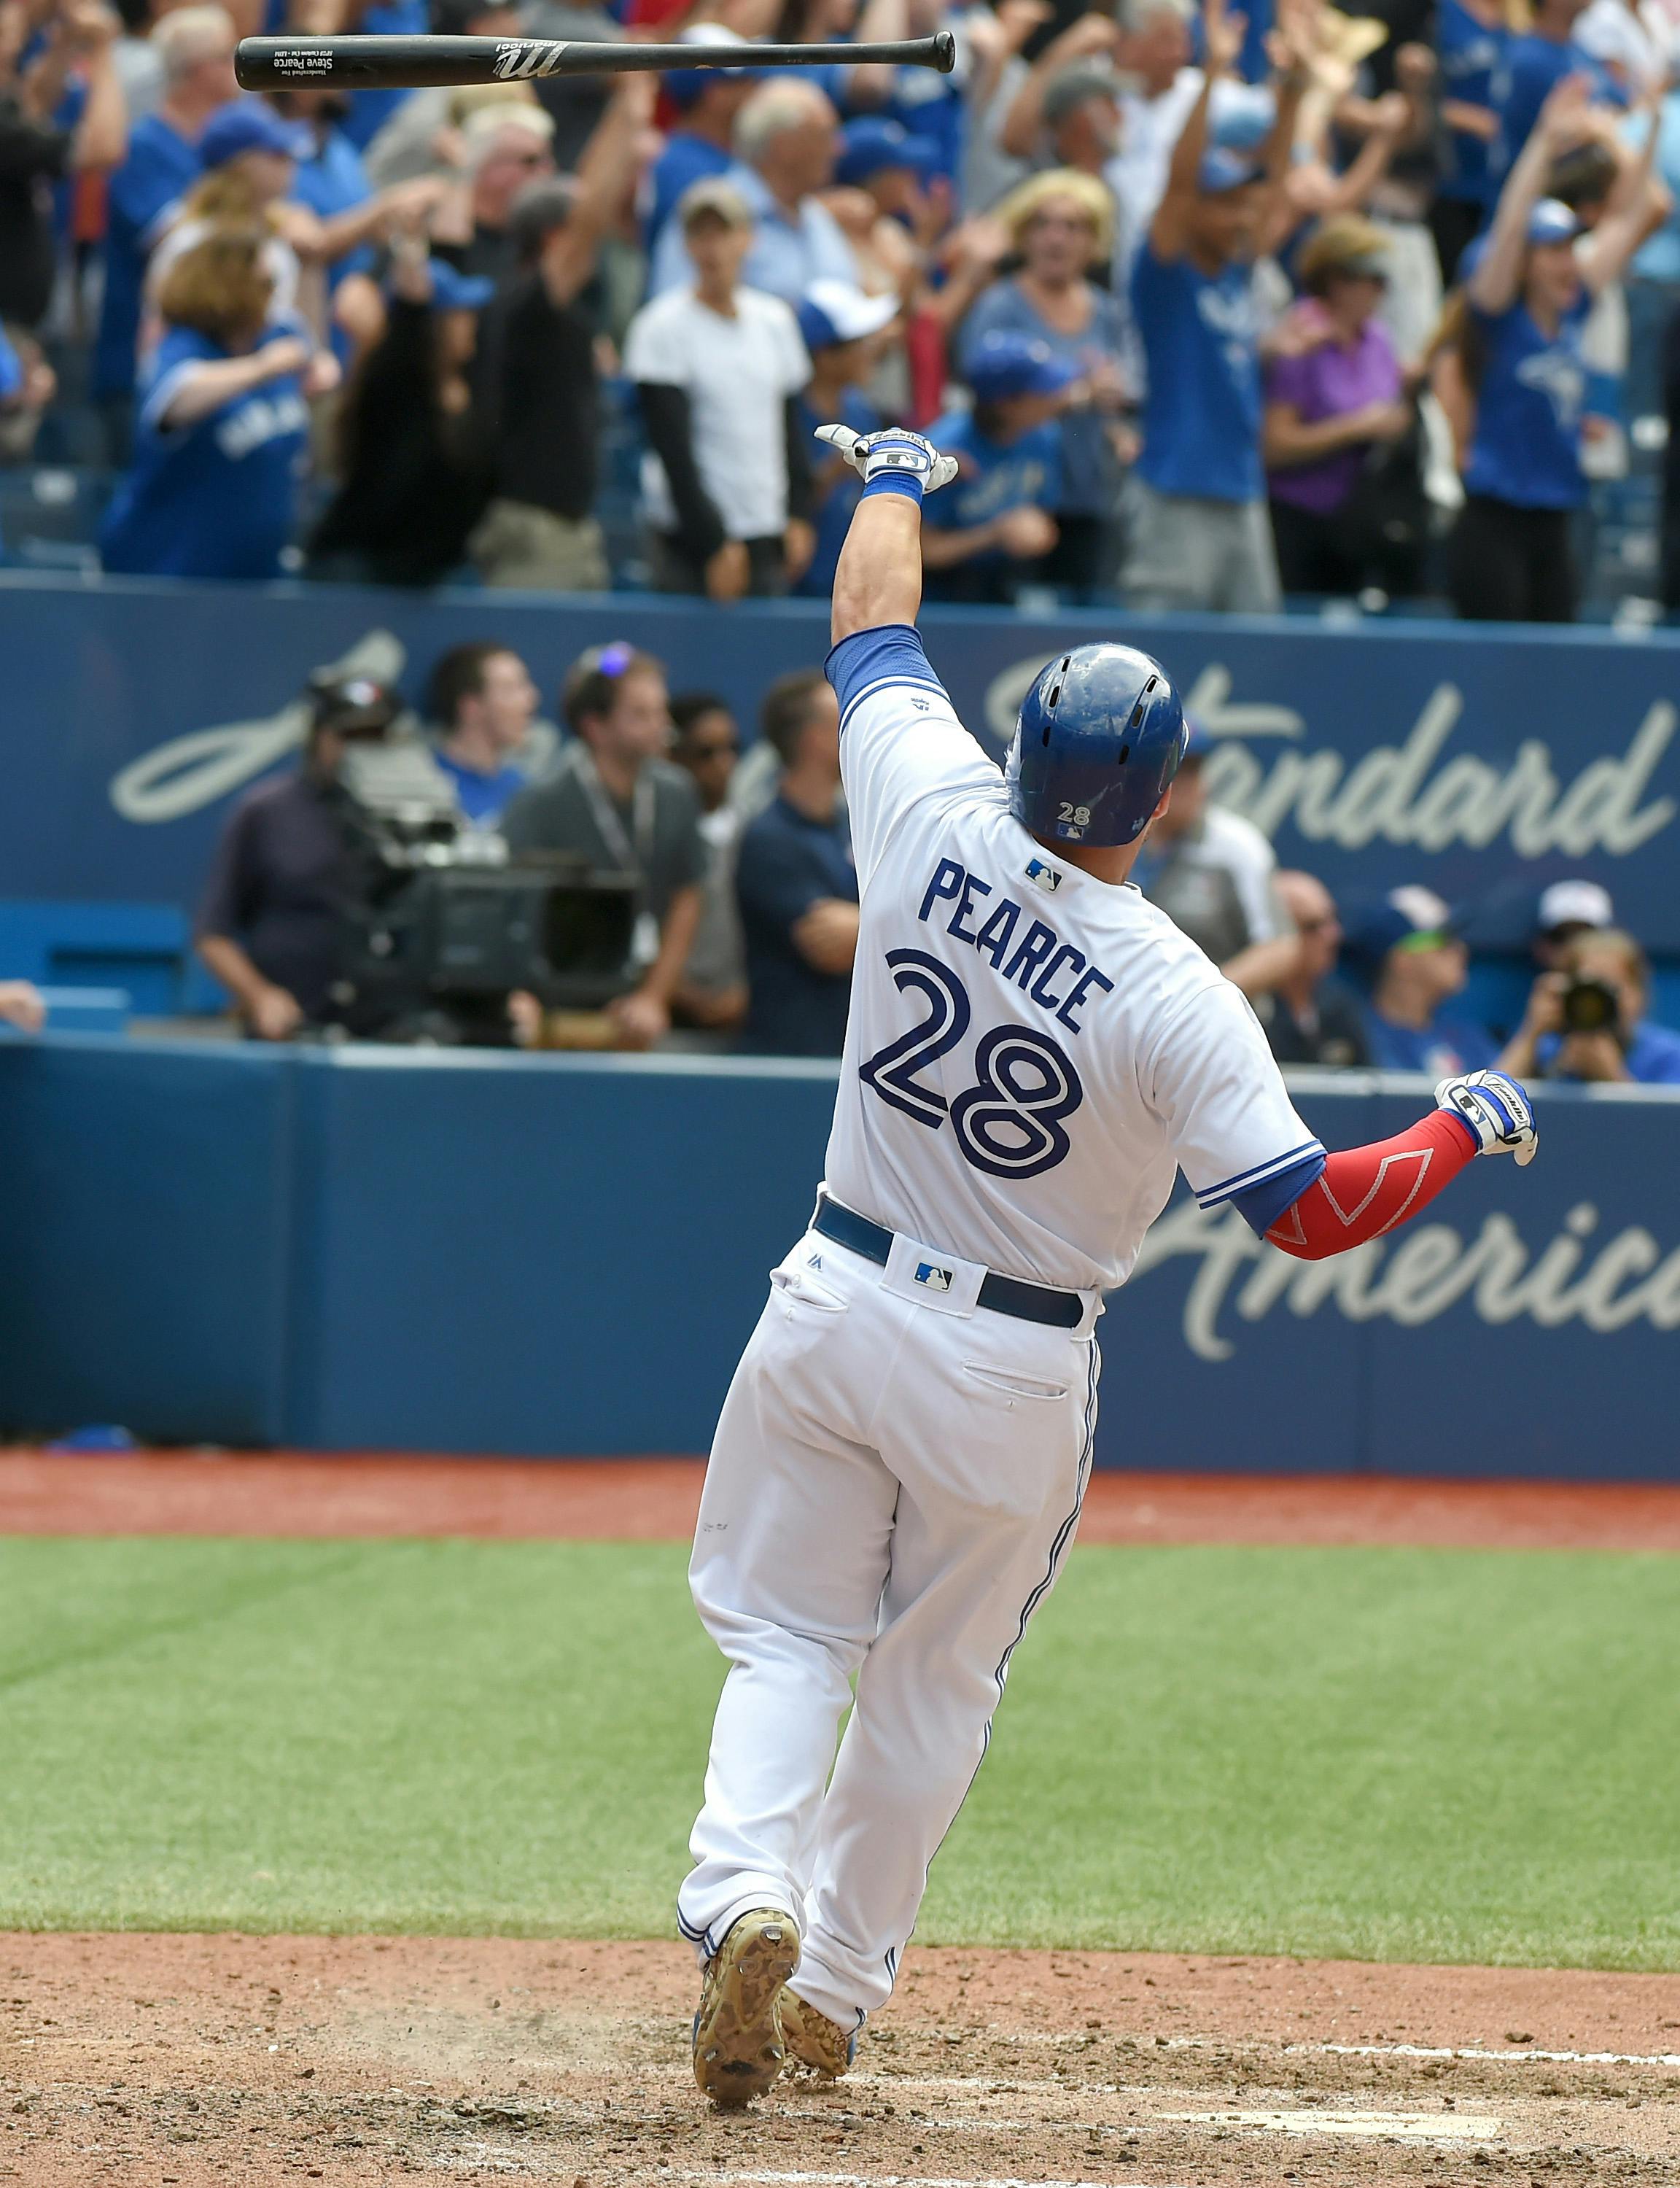 Yankees acquire Steve Pearce, outfielder/first baseman, from